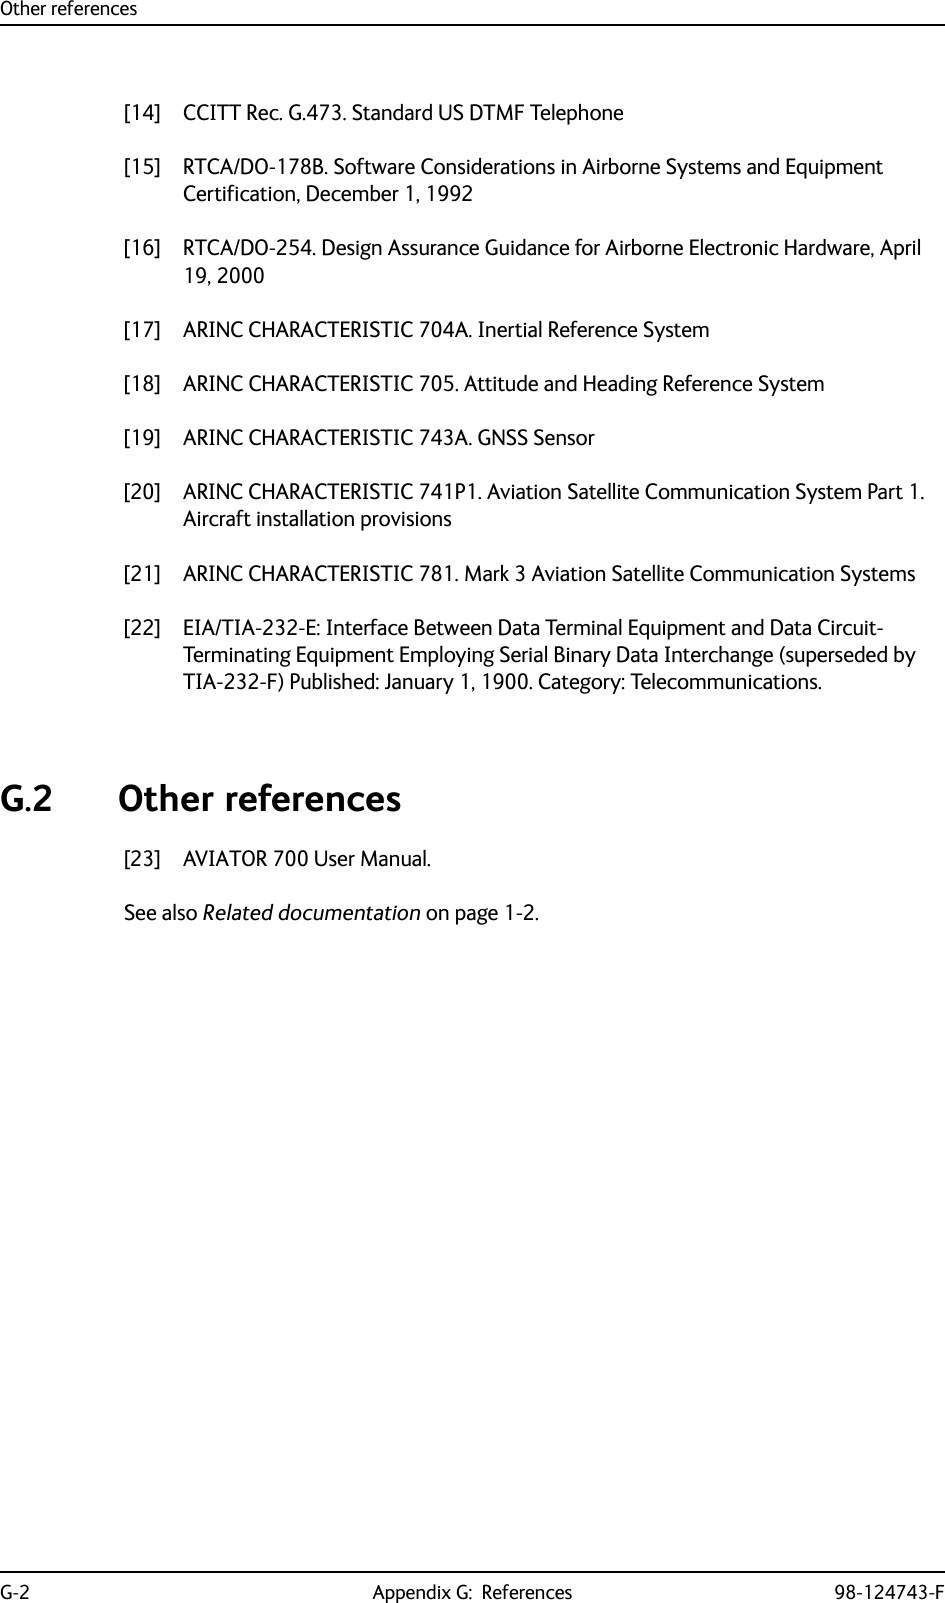 Other referencesG-2 Appendix G:  References 98-124743-F[14] CCITT Rec. G.473. Standard US DTMF Telephone[15] RTCA/DO-178B. Software Considerations in Airborne Systems and Equipment Certification, December 1, 1992[16] RTCA/DO-254. Design Assurance Guidance for Airborne Electronic Hardware, April 19, 2000[17] ARINC CHARACTERISTIC 704A. Inertial Reference System[18] ARINC CHARACTERISTIC 705. Attitude and Heading Reference System[19] ARINC CHARACTERISTIC 743A. GNSS Sensor[20] ARINC CHARACTERISTIC 741P1. Aviation Satellite Communication System Part 1. Aircraft installation provisions[21] ARINC CHARACTERISTIC 781. Mark 3 Aviation Satellite Communication Systems[22] EIA/TIA-232-E: Interface Between Data Terminal Equipment and Data Circuit-Terminating Equipment Employing Serial Binary Data Interchange (superseded by TIA-232-F) Published: January 1, 1900. Category: Telecommunications.G.2 Other references[23] AVIATOR 700 User Manual. See also Related documentation on page 1-2.